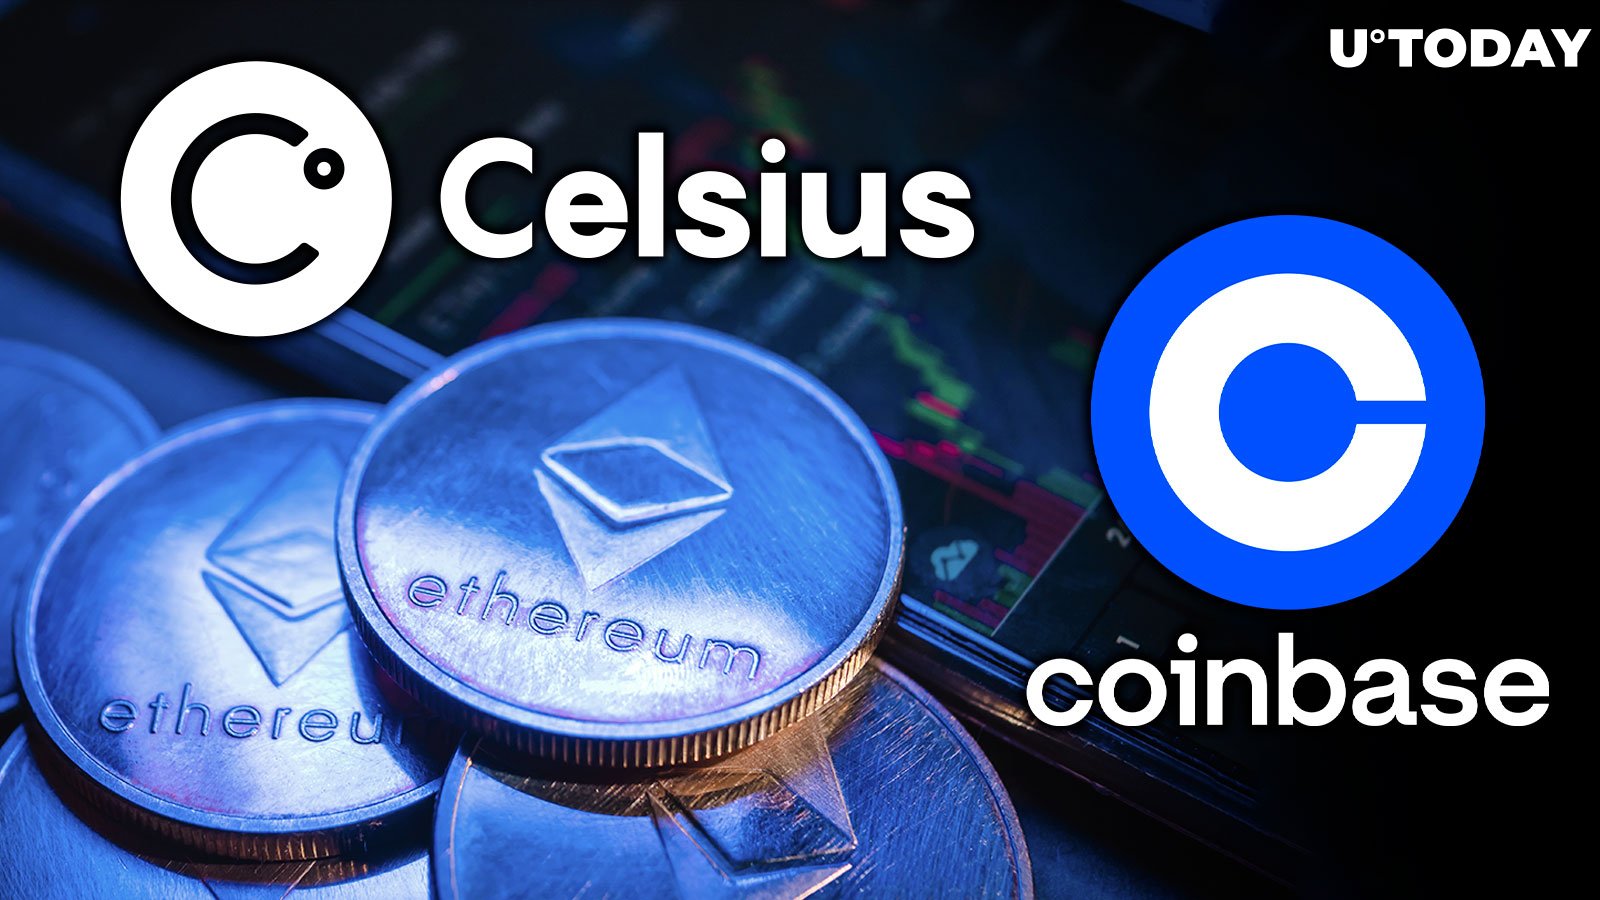 Celsius Unloads $40 Million Worth of Ethereum on Coinbase - How Will Price React?